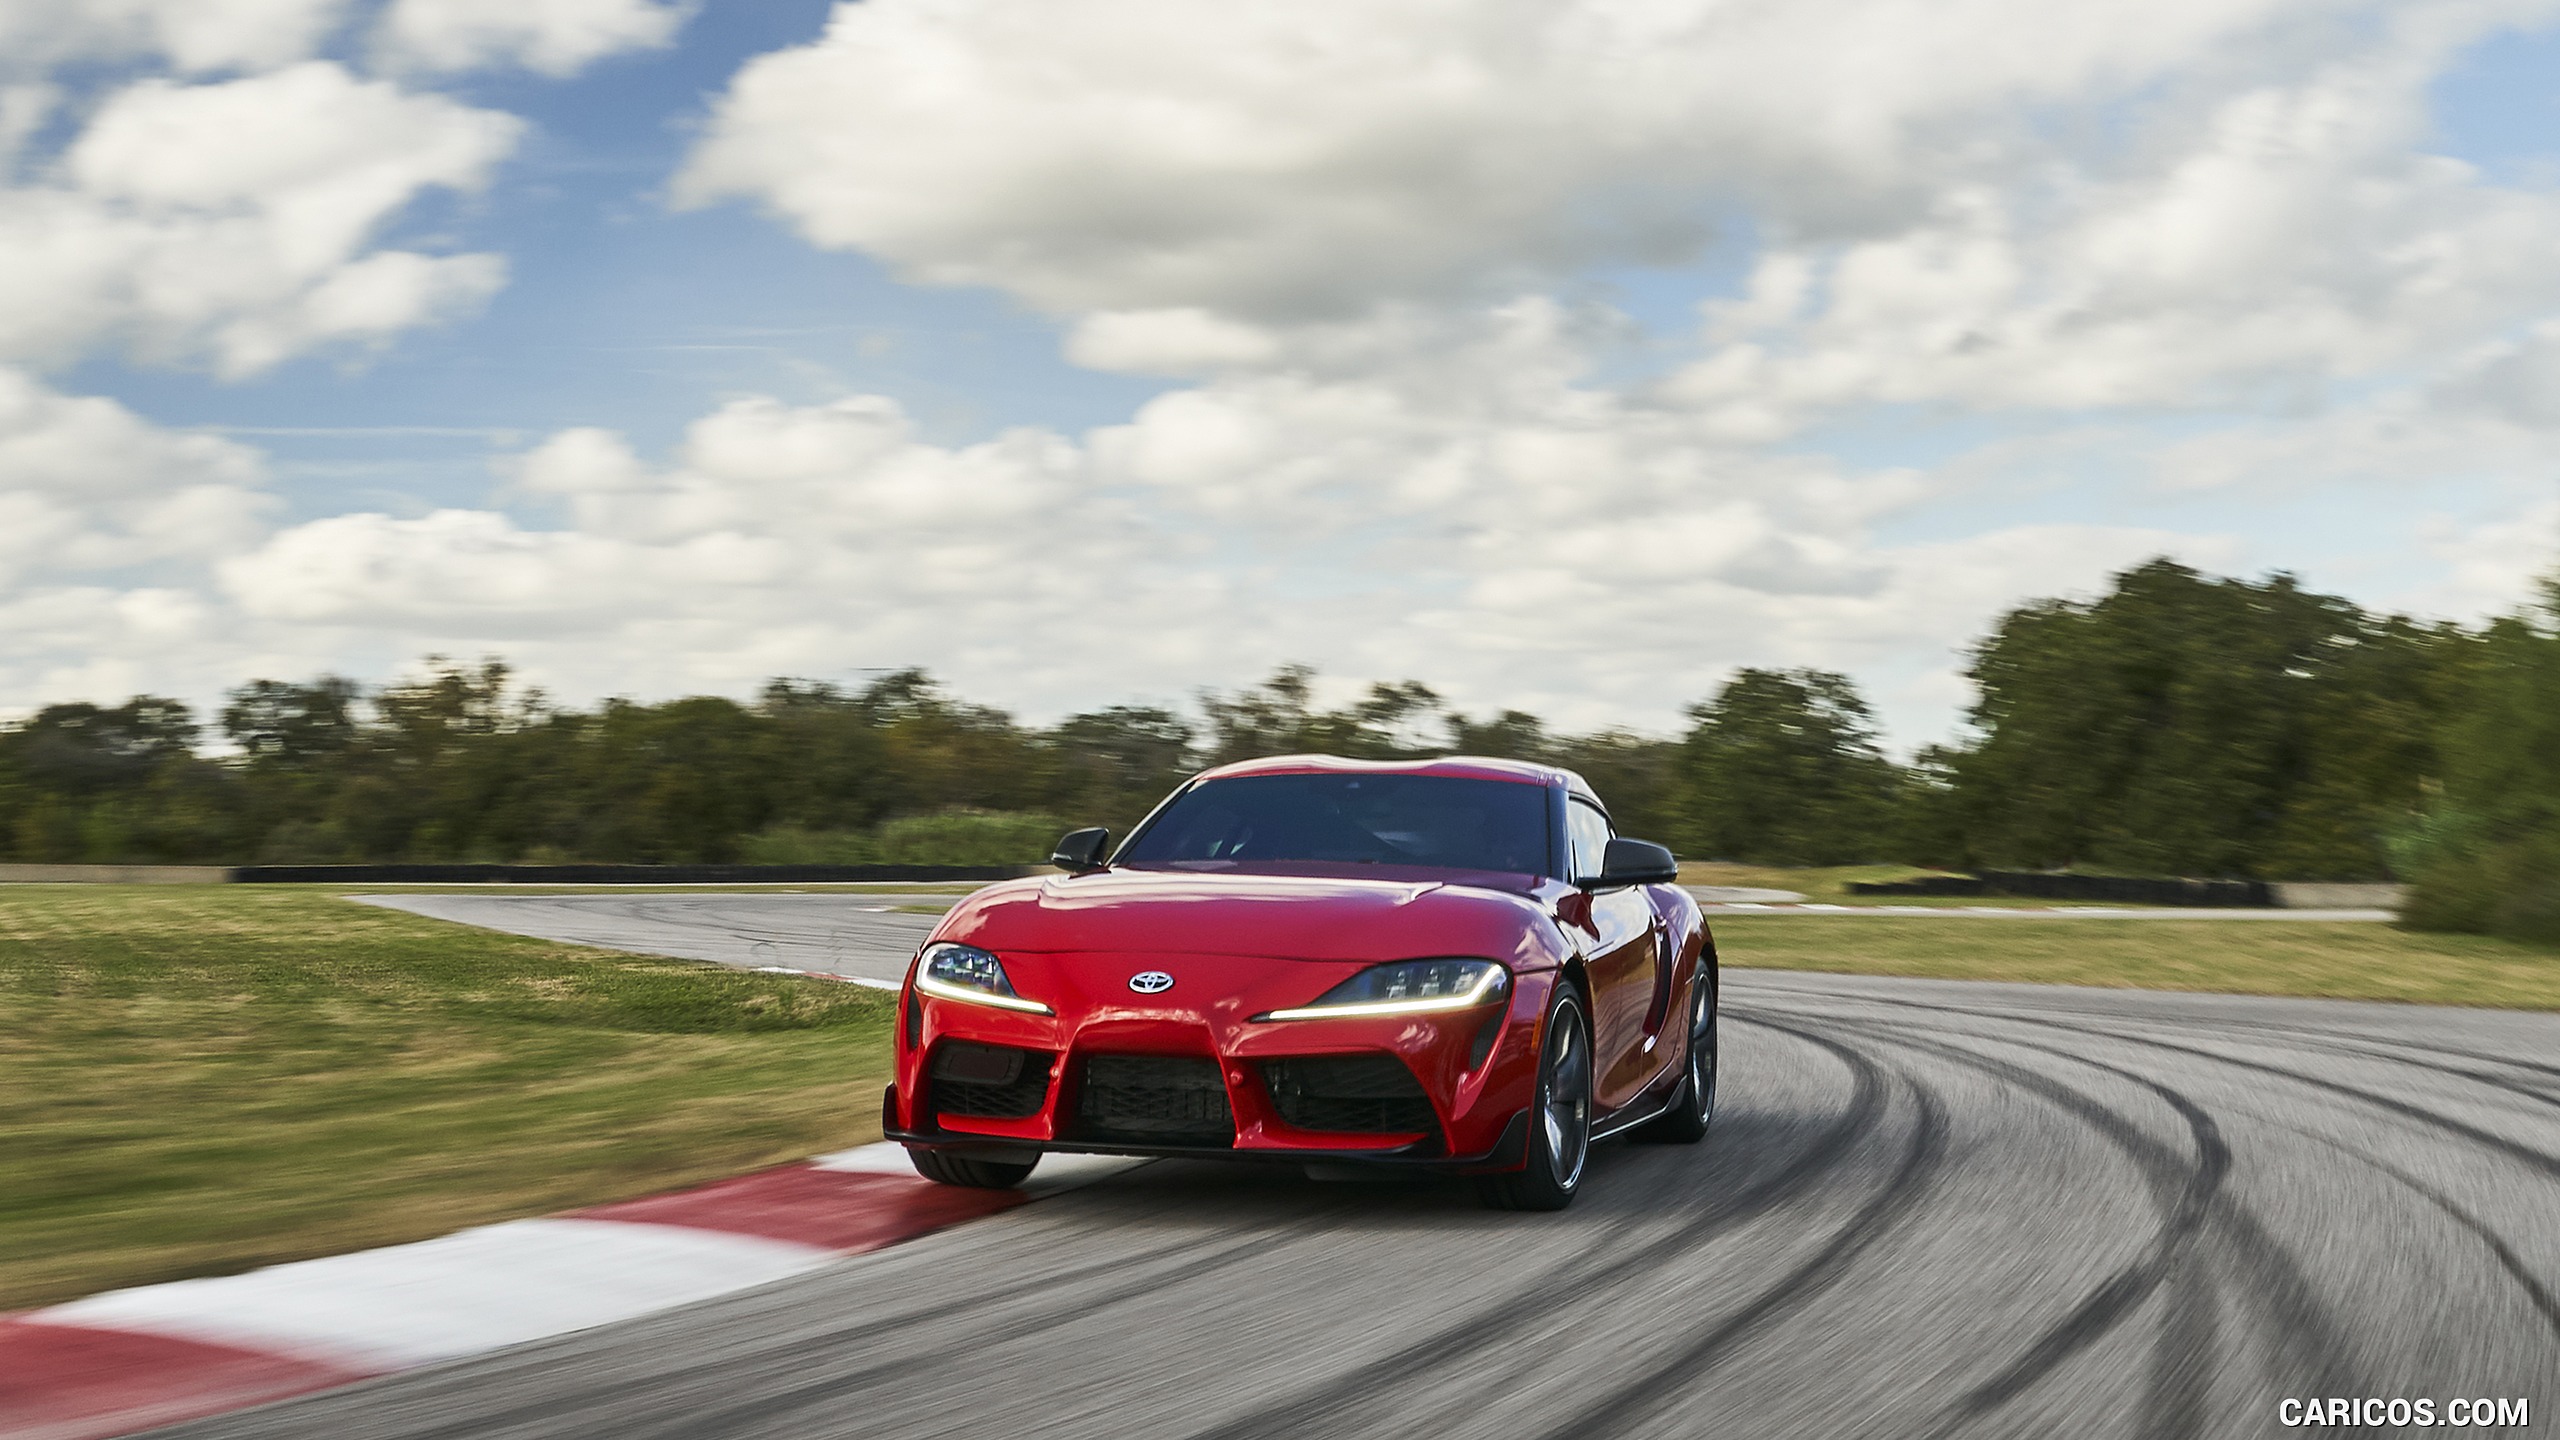 Free Download 2020 Toyota Supra Front Hd Wallpaper 11 2560x1440 For Your Desktop Mobile Tablet Explore 50 Toyota Supra 2020 Wallpapers Toyota Supra 2020 Wallpapers Toyota Supra Wallpaper 2017 Toyota Supra Wallpaper - 2020 toyota supra roblox